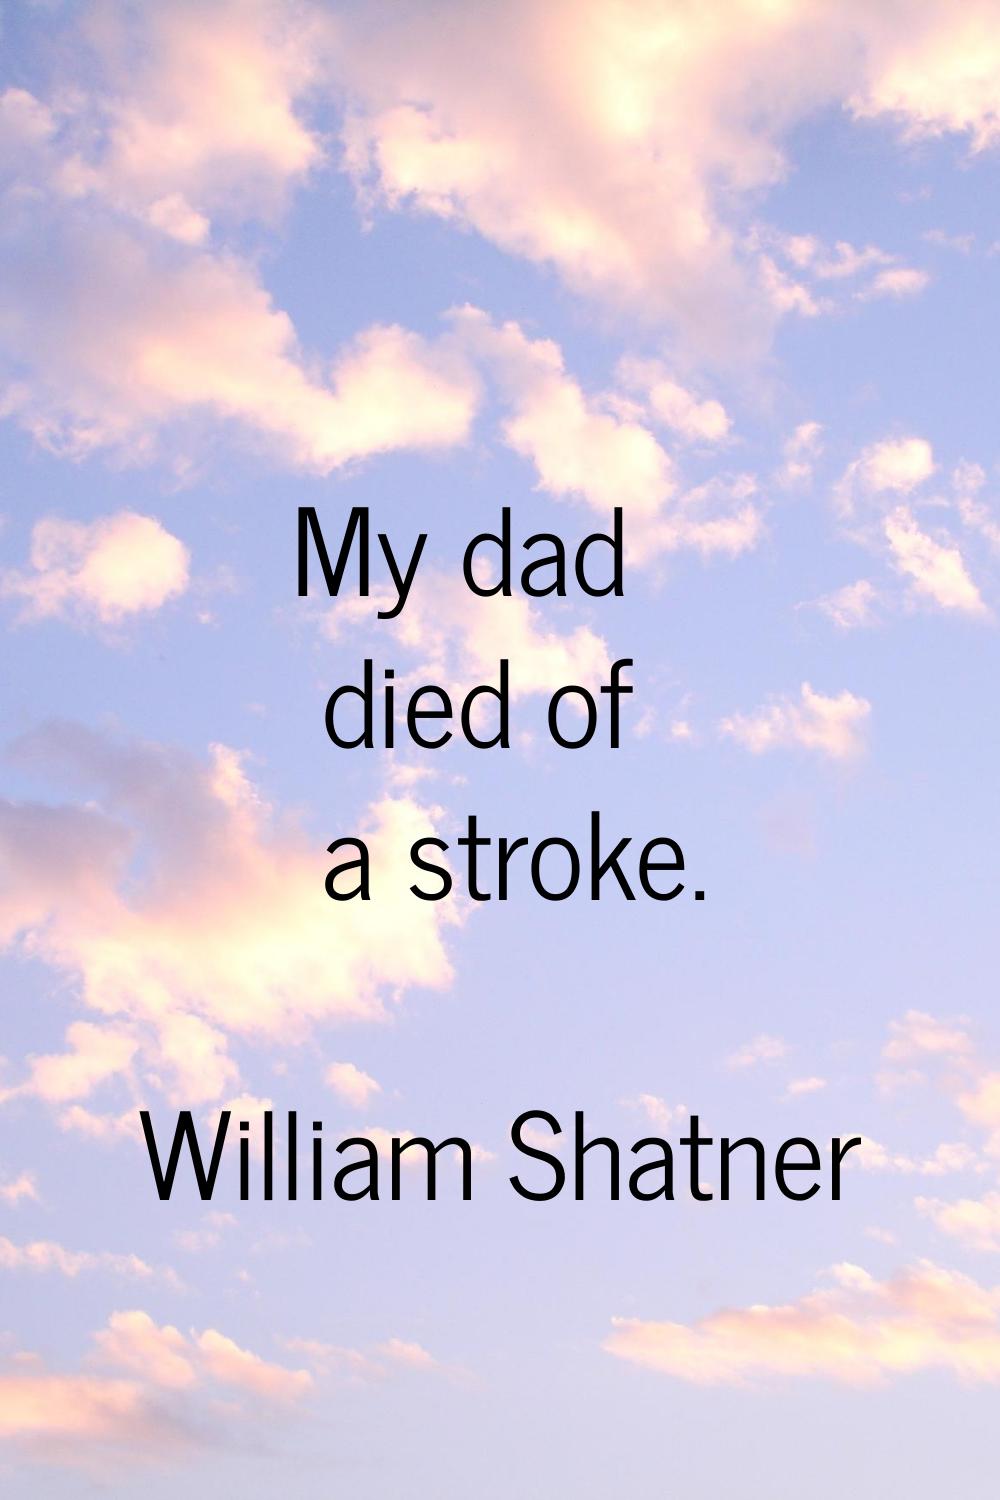 My dad died of a stroke.